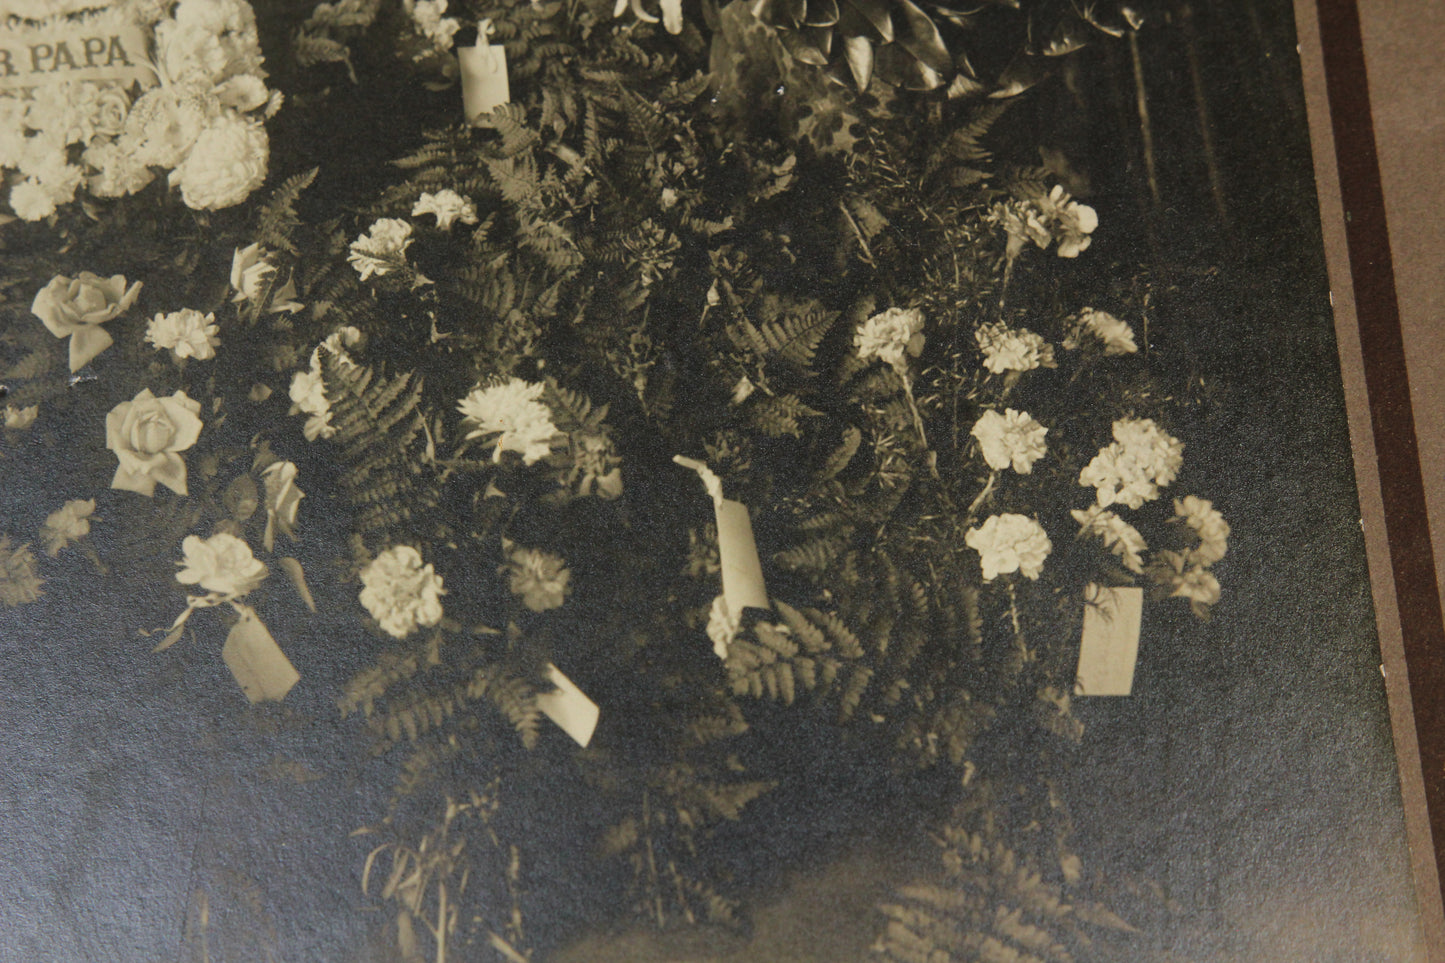 Antique Matted Funeral Flower Arrangement Photograph for "Our Papa"